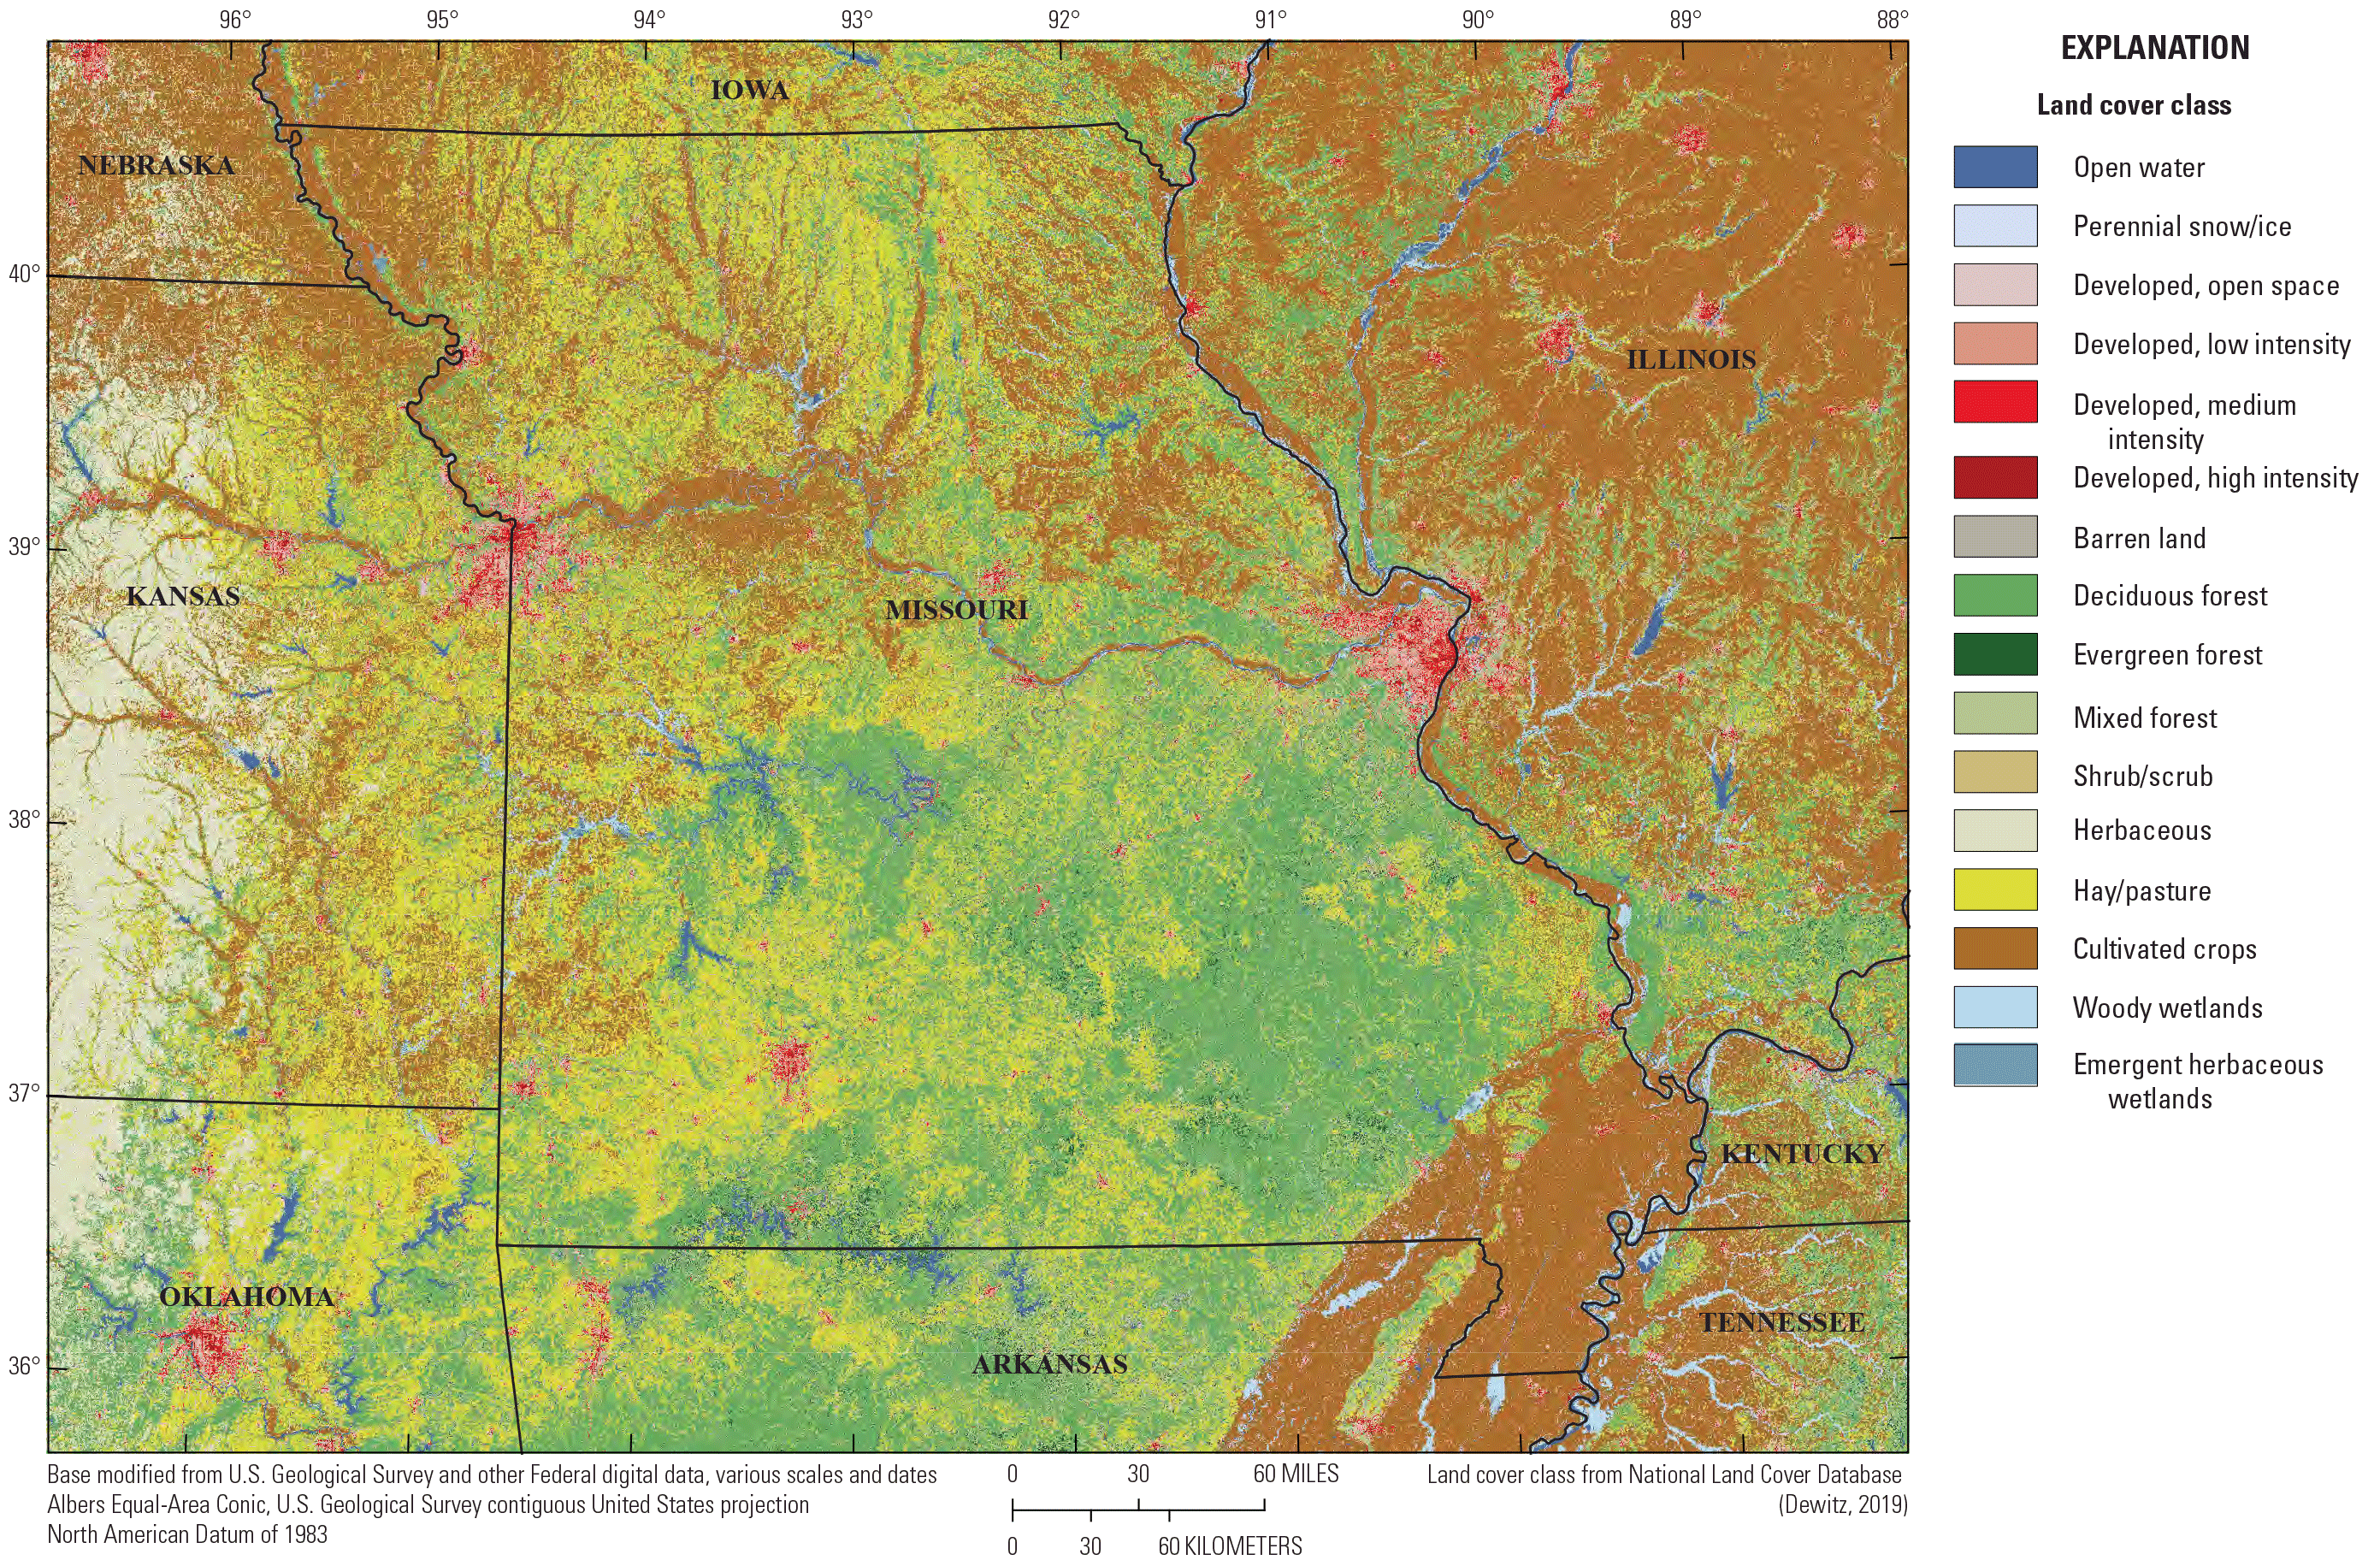 Land cover in Missouri. The northern part of the state is dominated by cultivated
                           crops and hay/pasture. The southern part of the state is dominated by deciduous forest
                           and hay/pasture, along with an area of mostly cultivated crops in the southeast part
                           of the state.